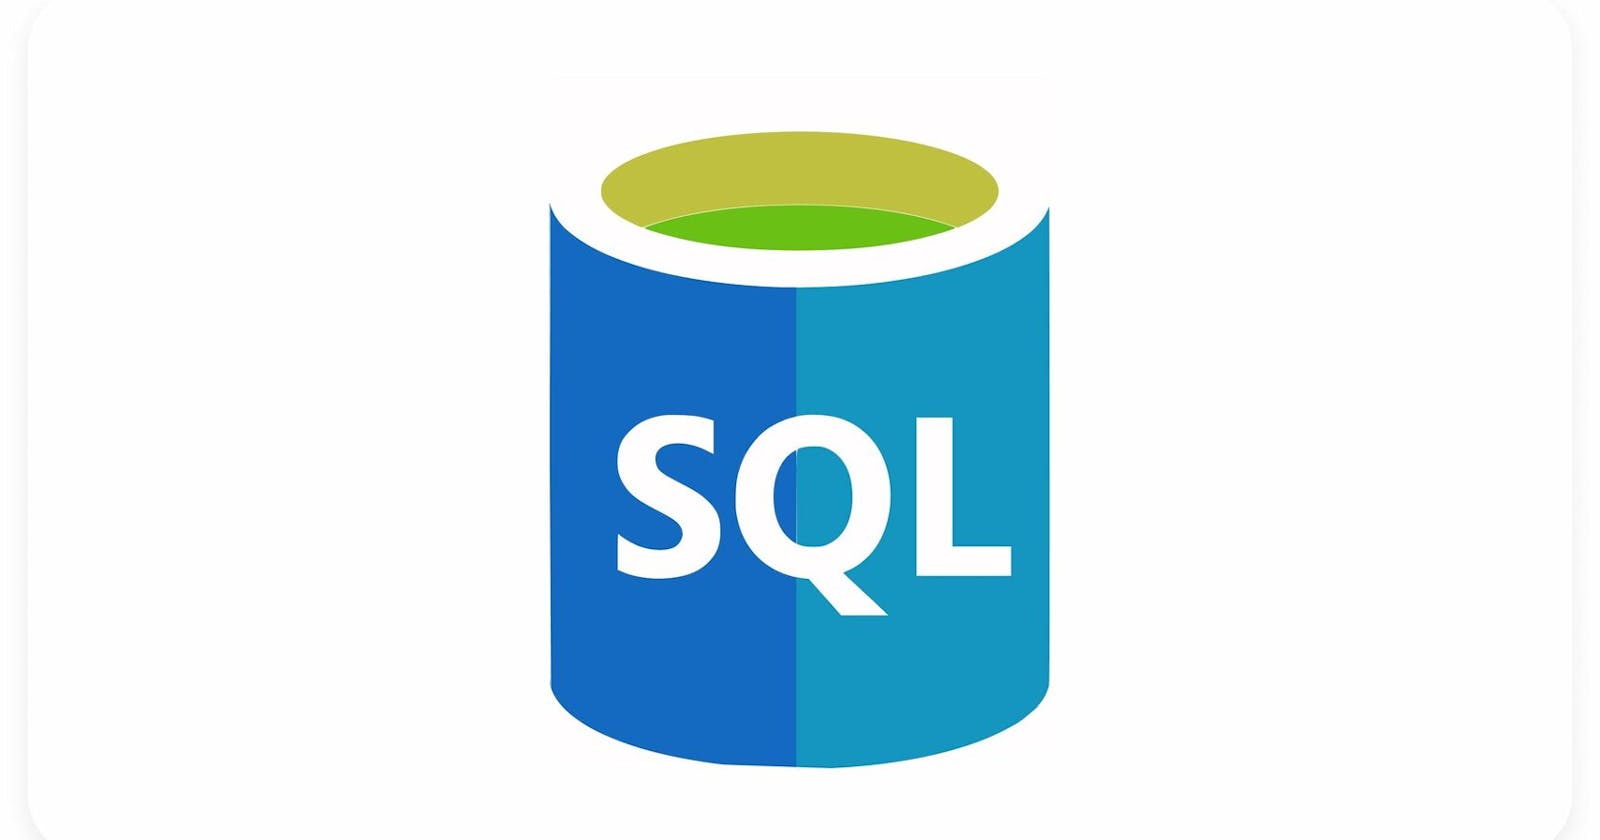 How to enable TCP/IP Protocol in MS SQL